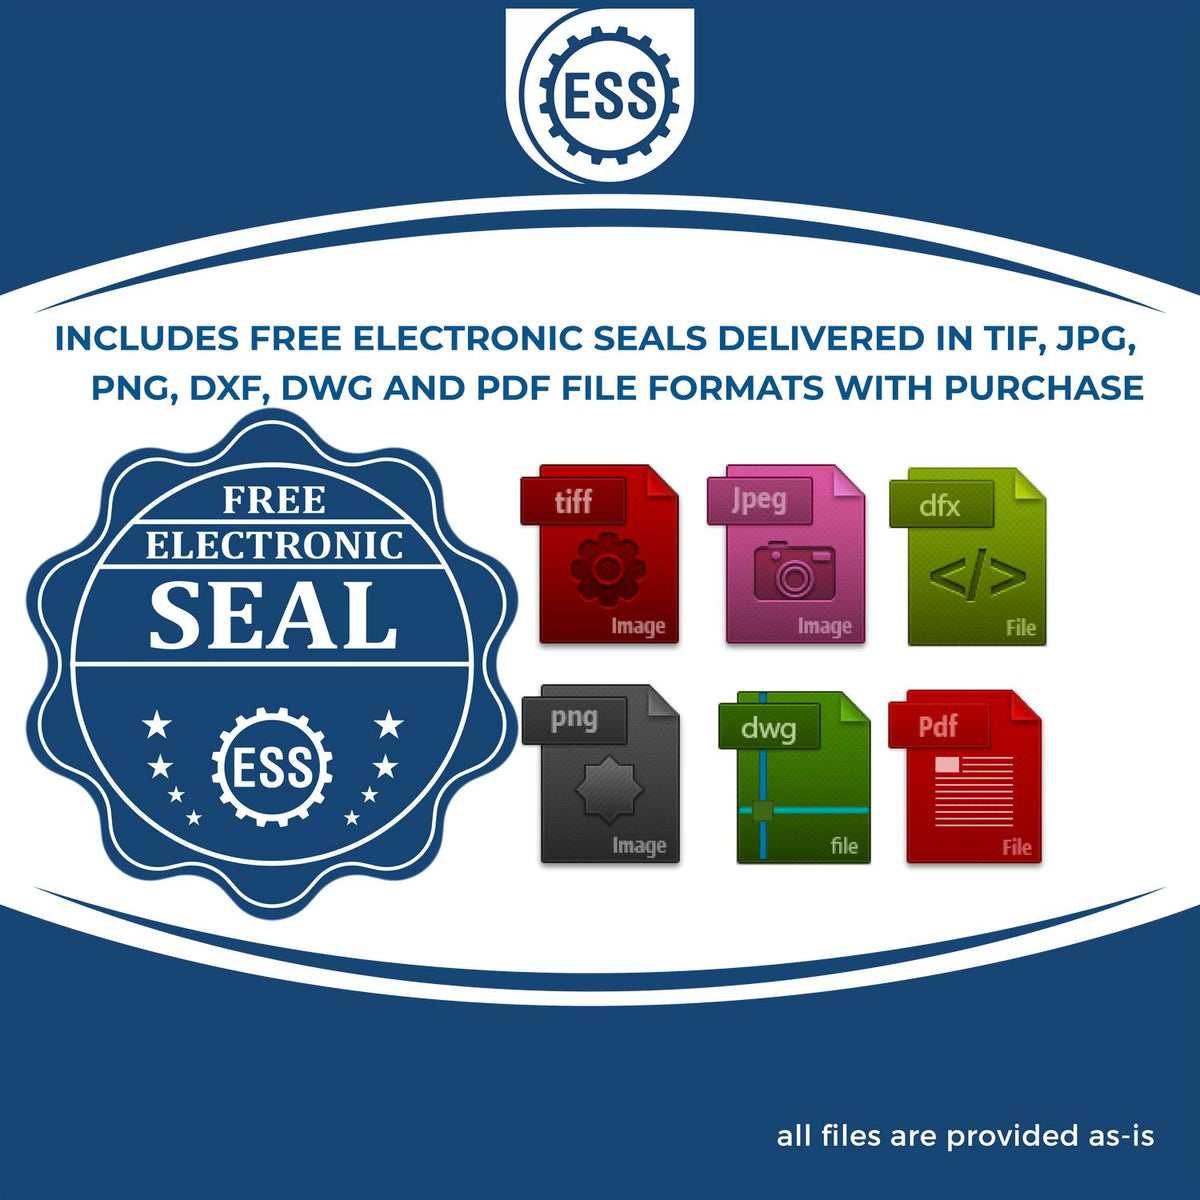 An infographic for the free electronic seal for the Slim Pre-Inked Louisiana Professional Geologist Seal Stamp illustrating the different file type icons such as DXF, DWG, TIF, JPG and PNG.